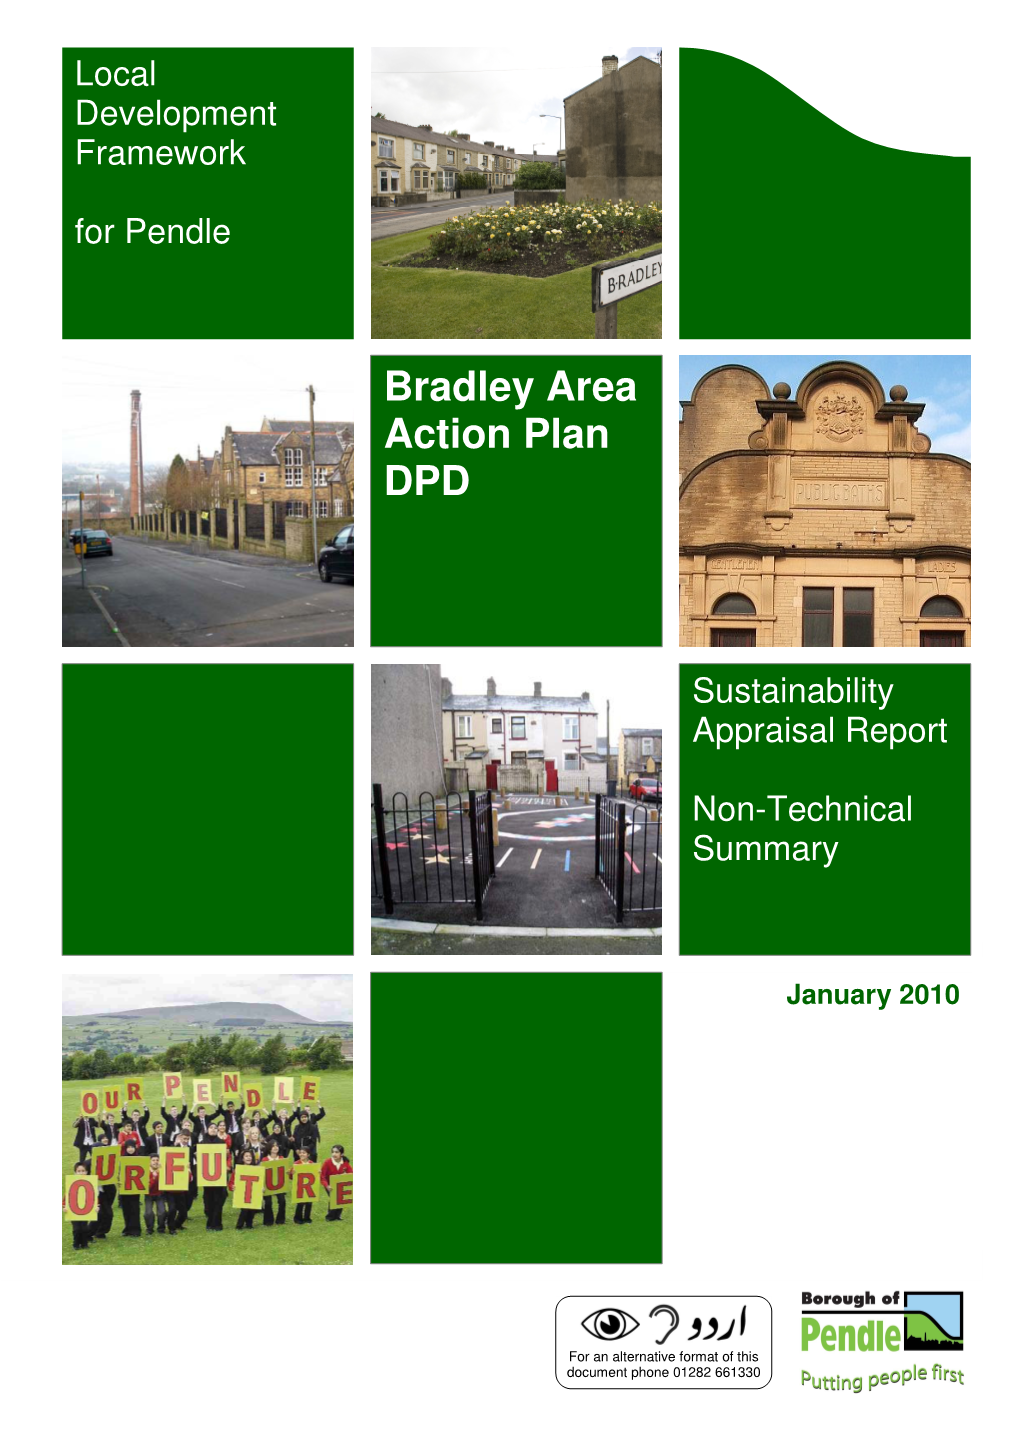 Bradley Area Action Plan – Progress to Date and Next Steps